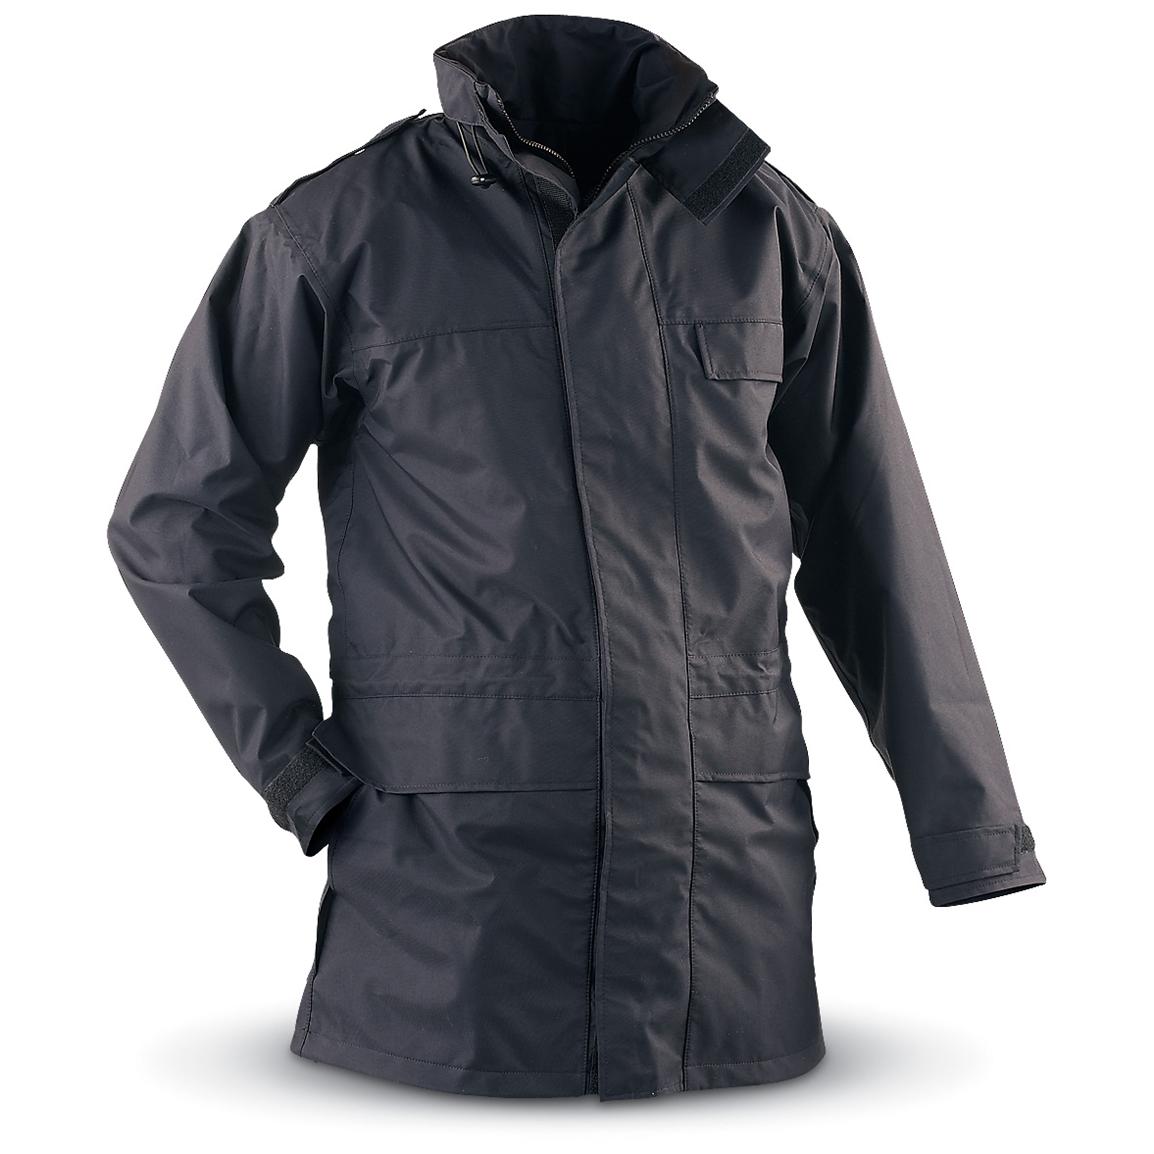 New British Waterproof / Breathable Jacket with Liner, Navy Blue ...